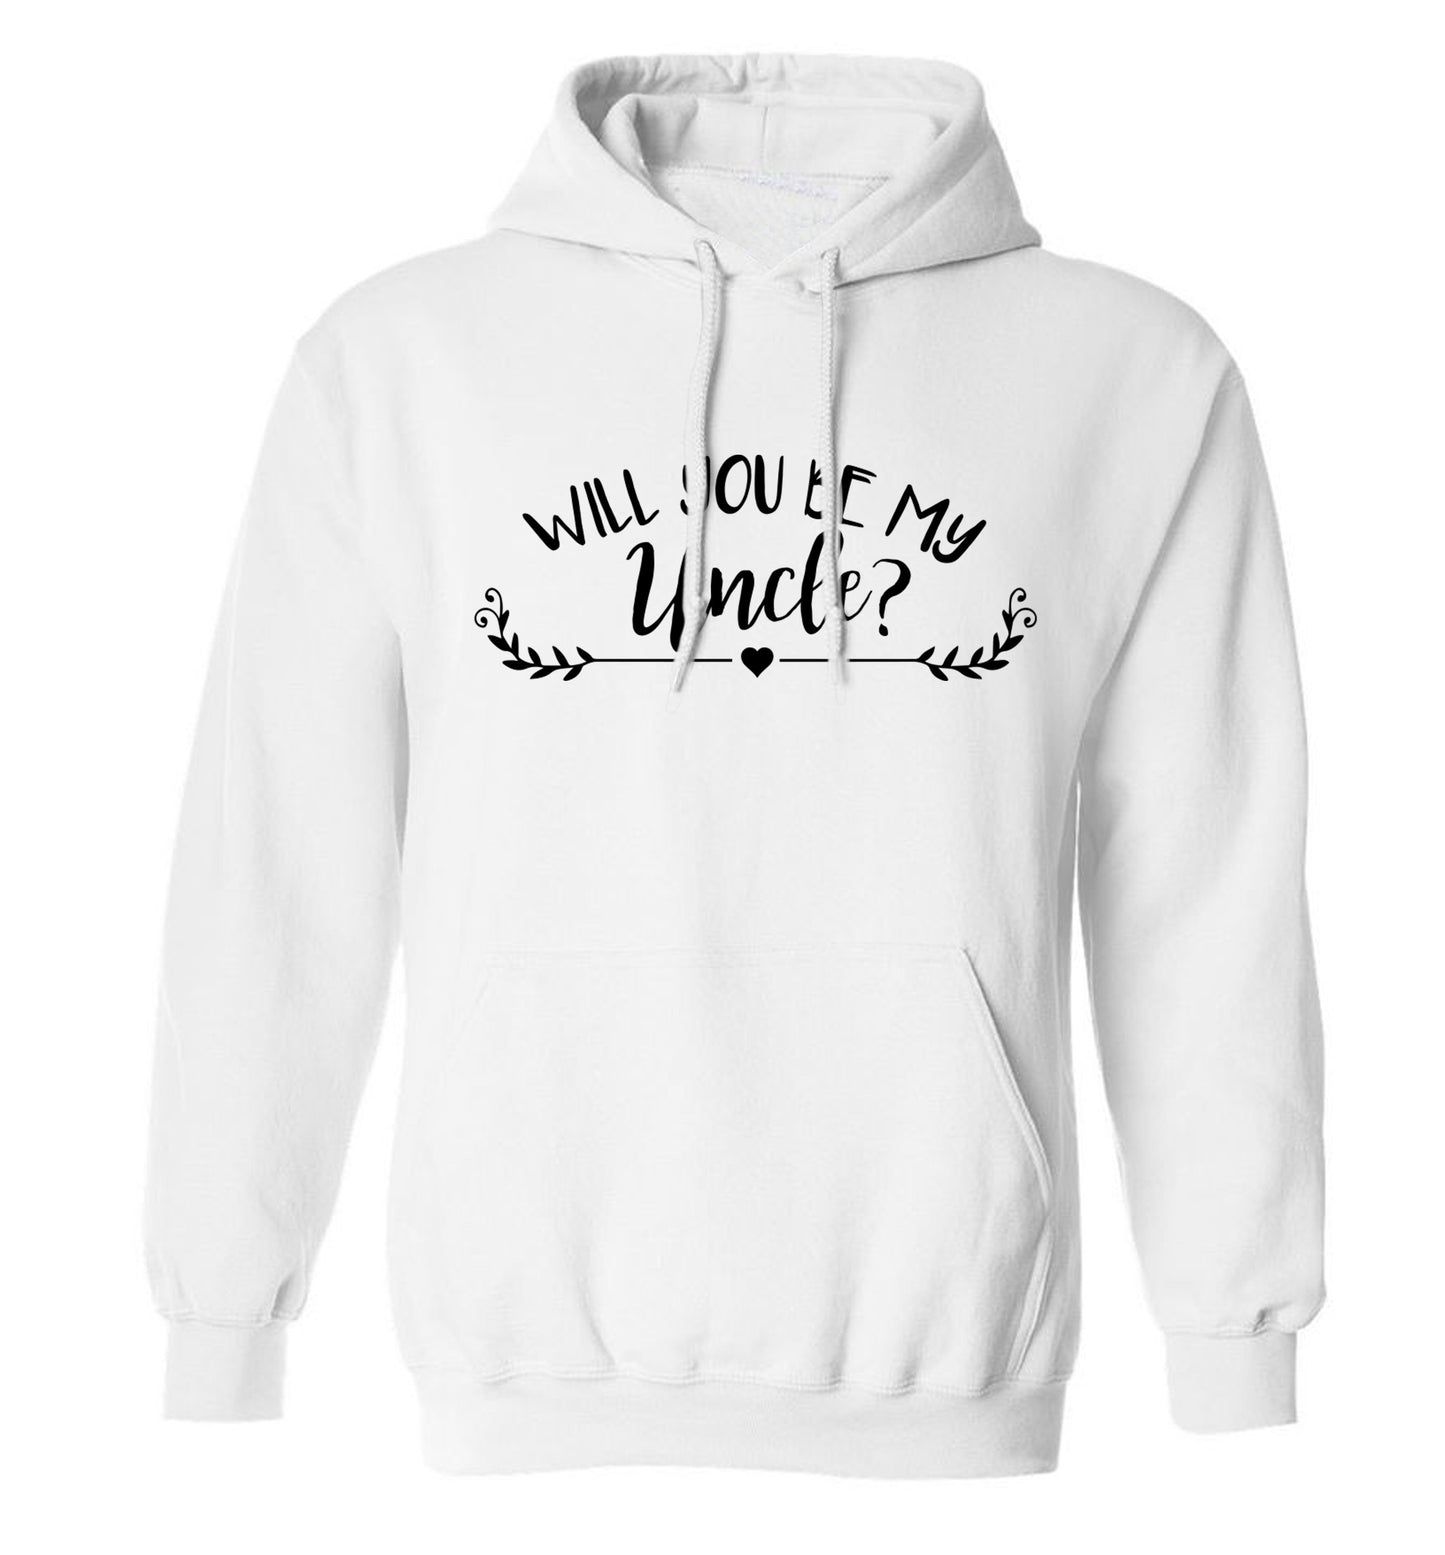 Will you be my uncle? adults unisex white hoodie 2XL